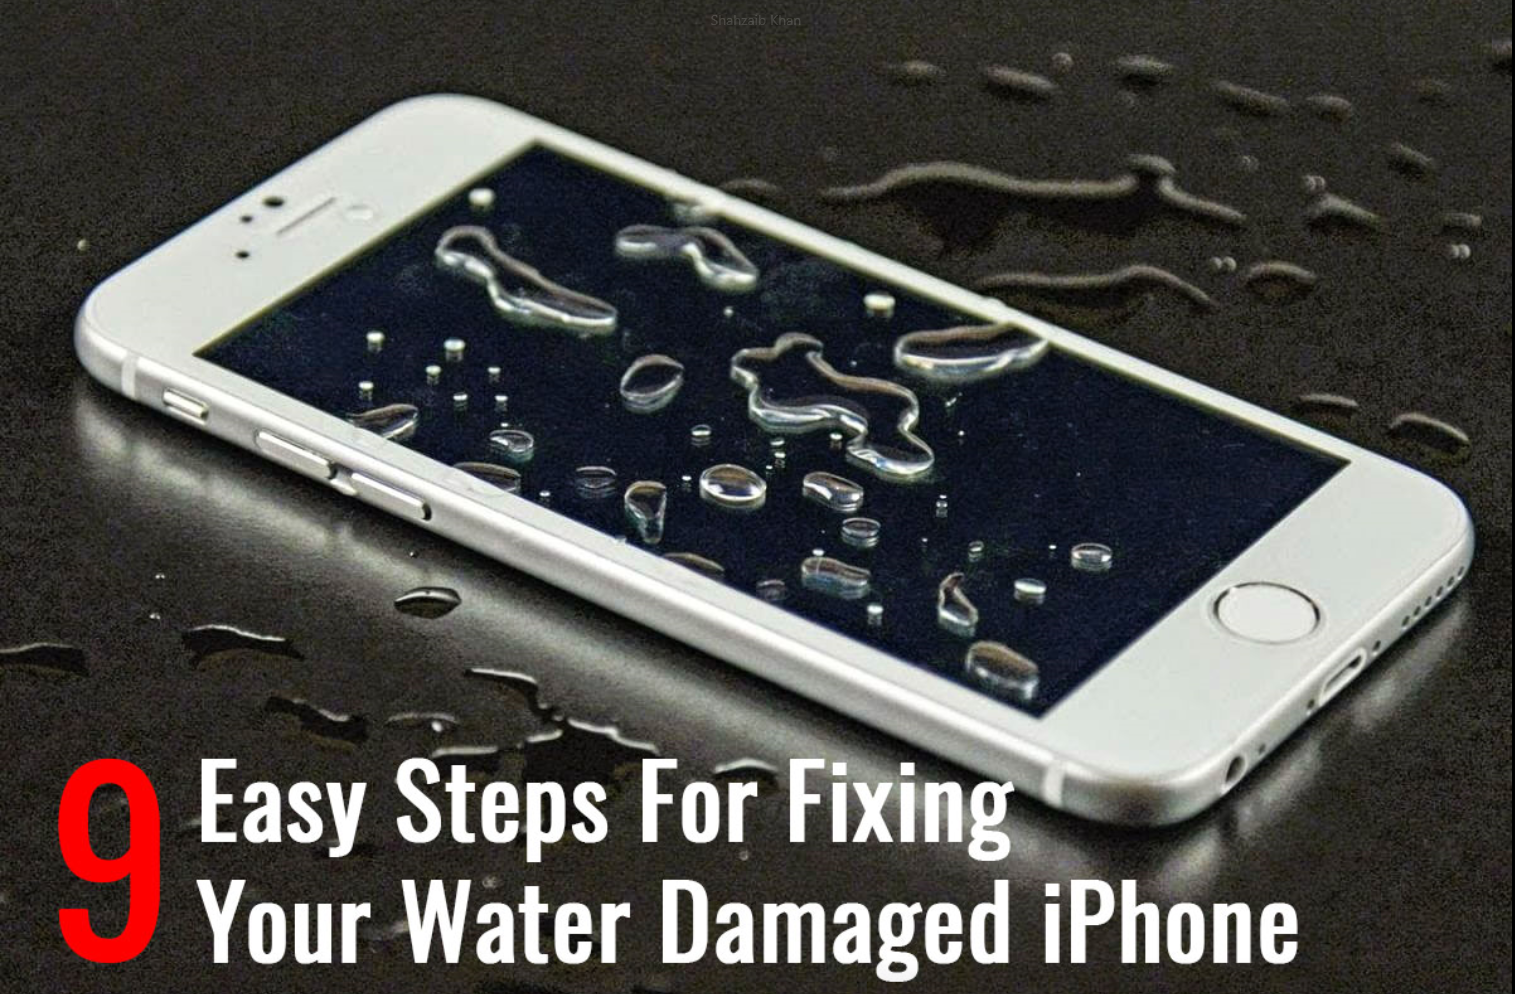 9 Easy Steps For Fixing Your Water Damaged iPhone